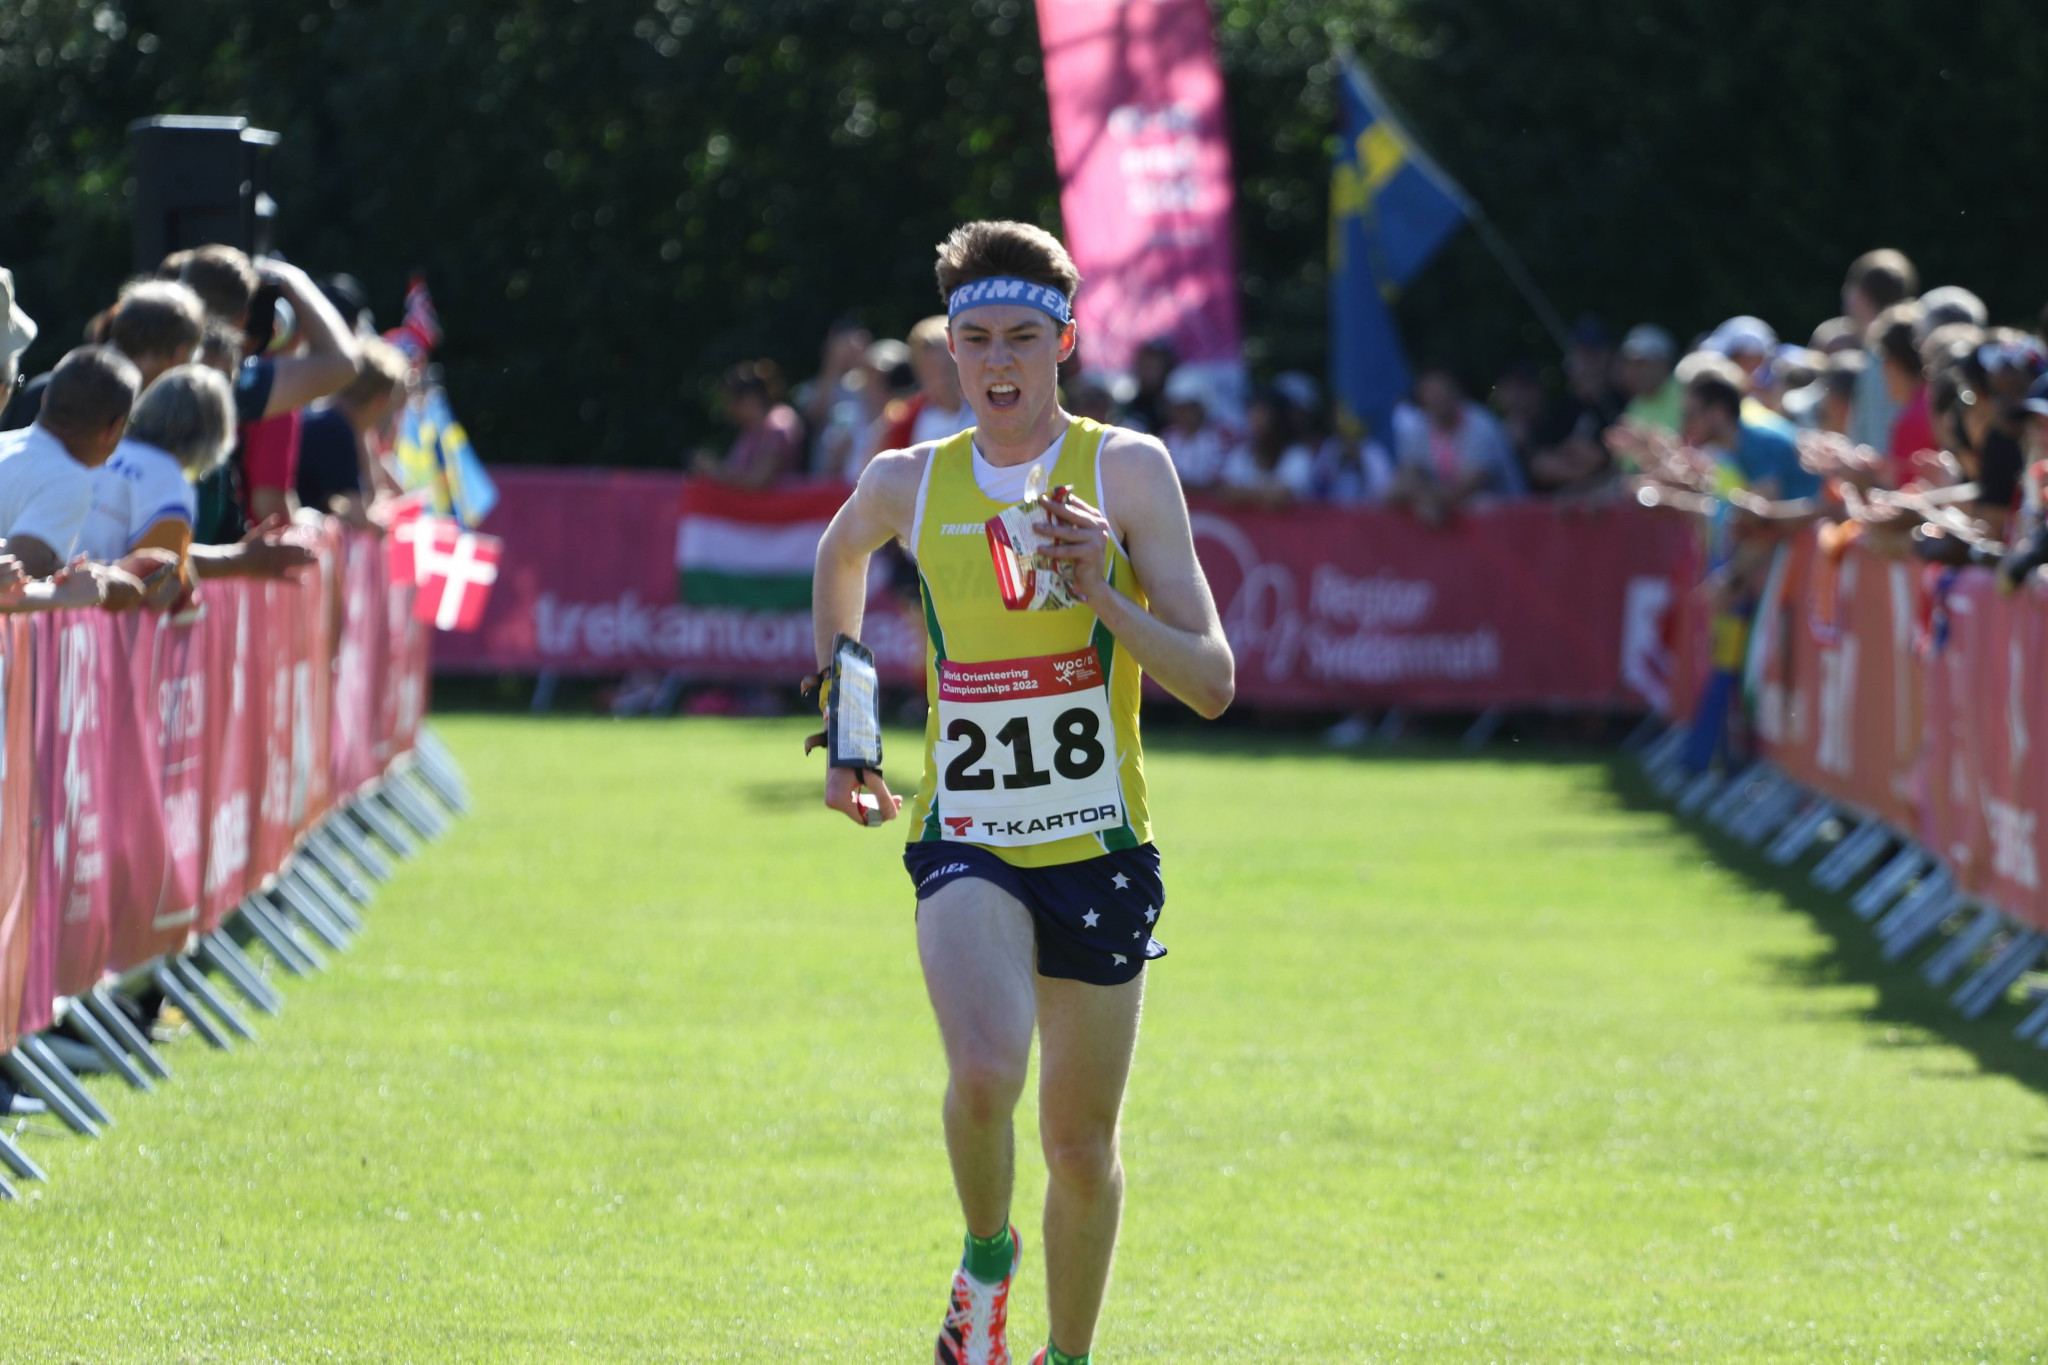 Orienteering is one of several sports battling it out for a spot at Victoria 2026 ©WOC 2022